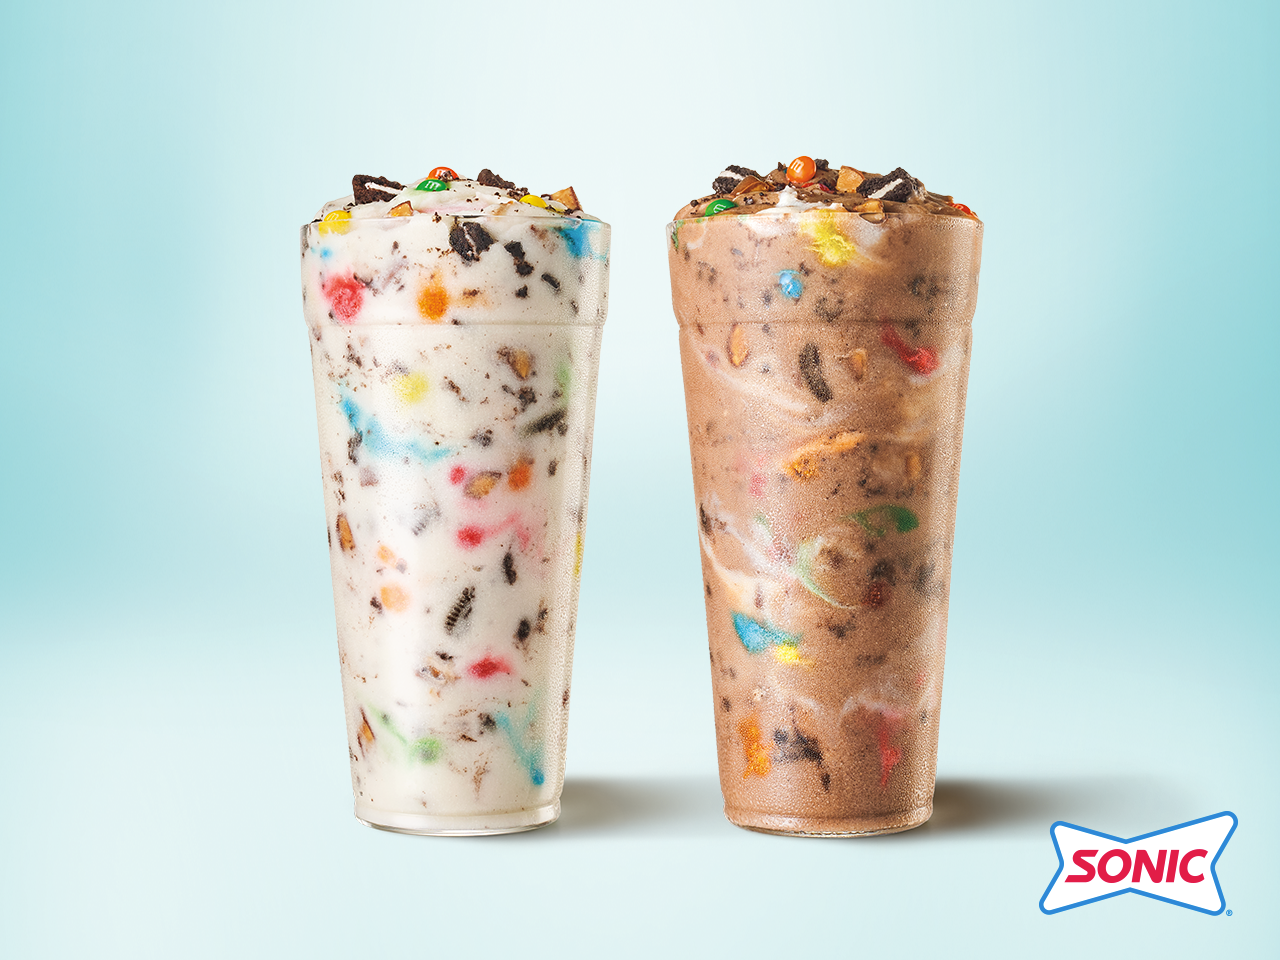 Sonic Drive-Ins scoop up real ice cream